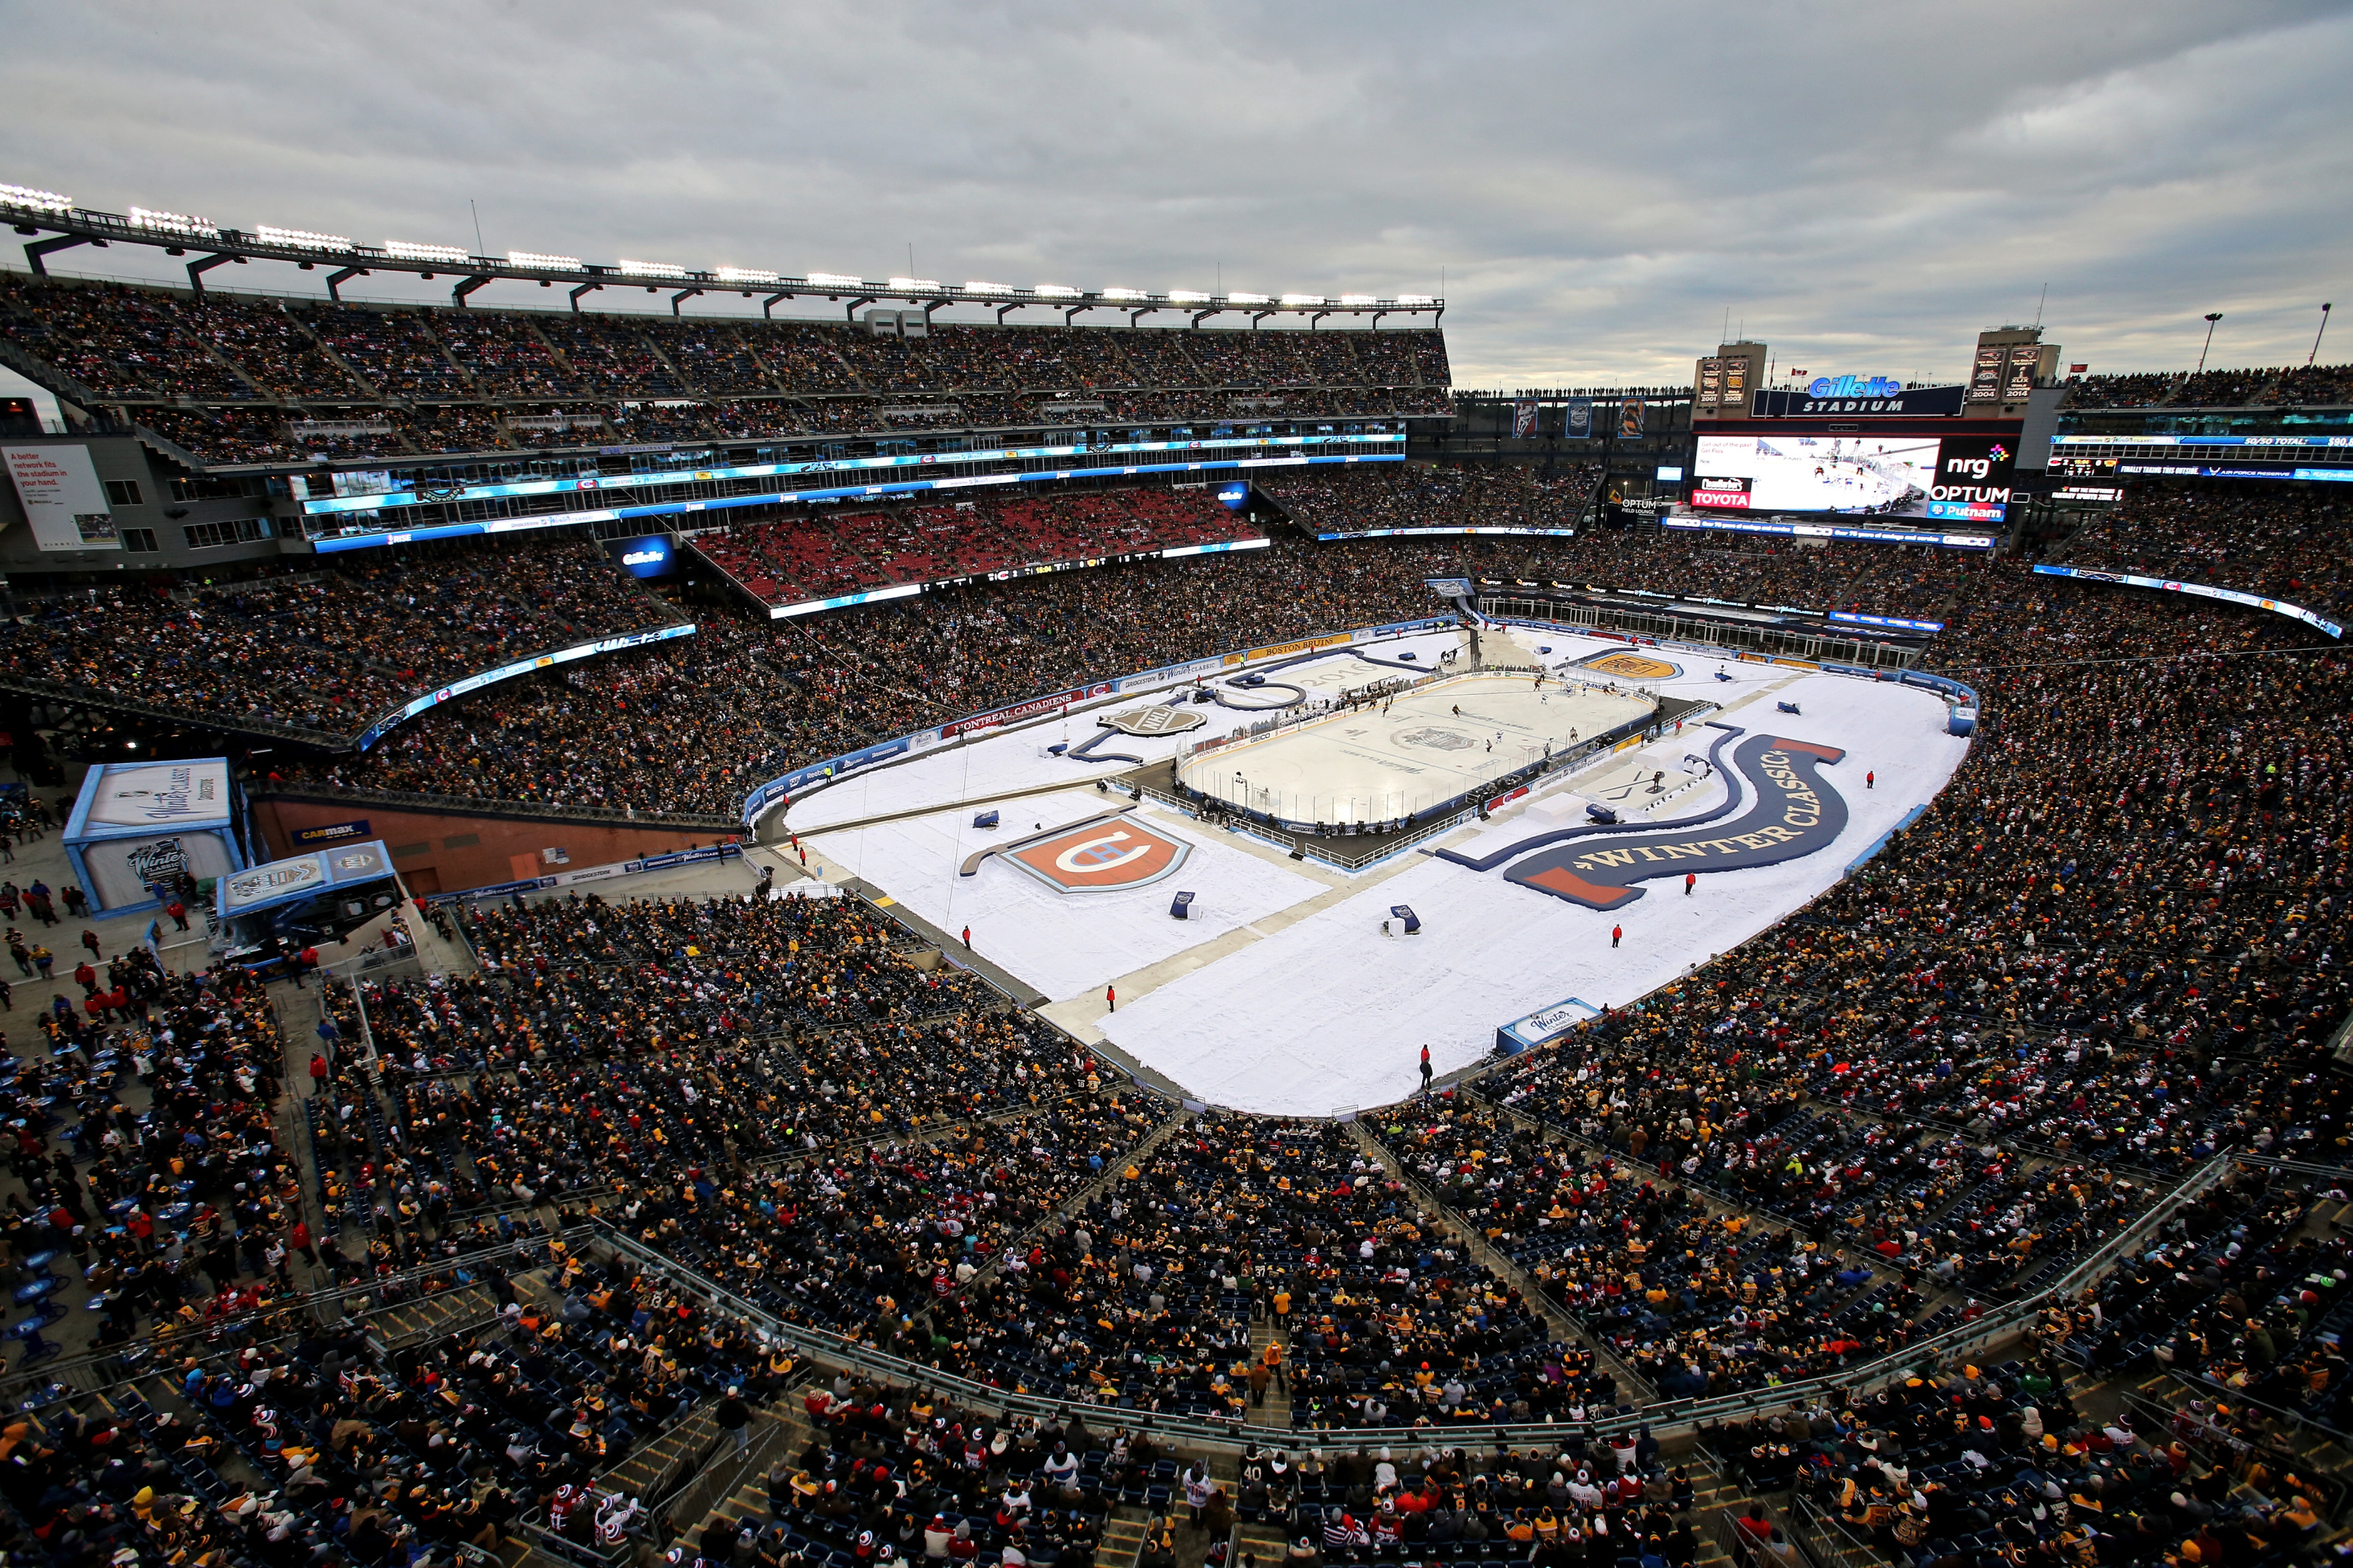 January 1, 2010 NHL Winter Classic at Fenway Park.